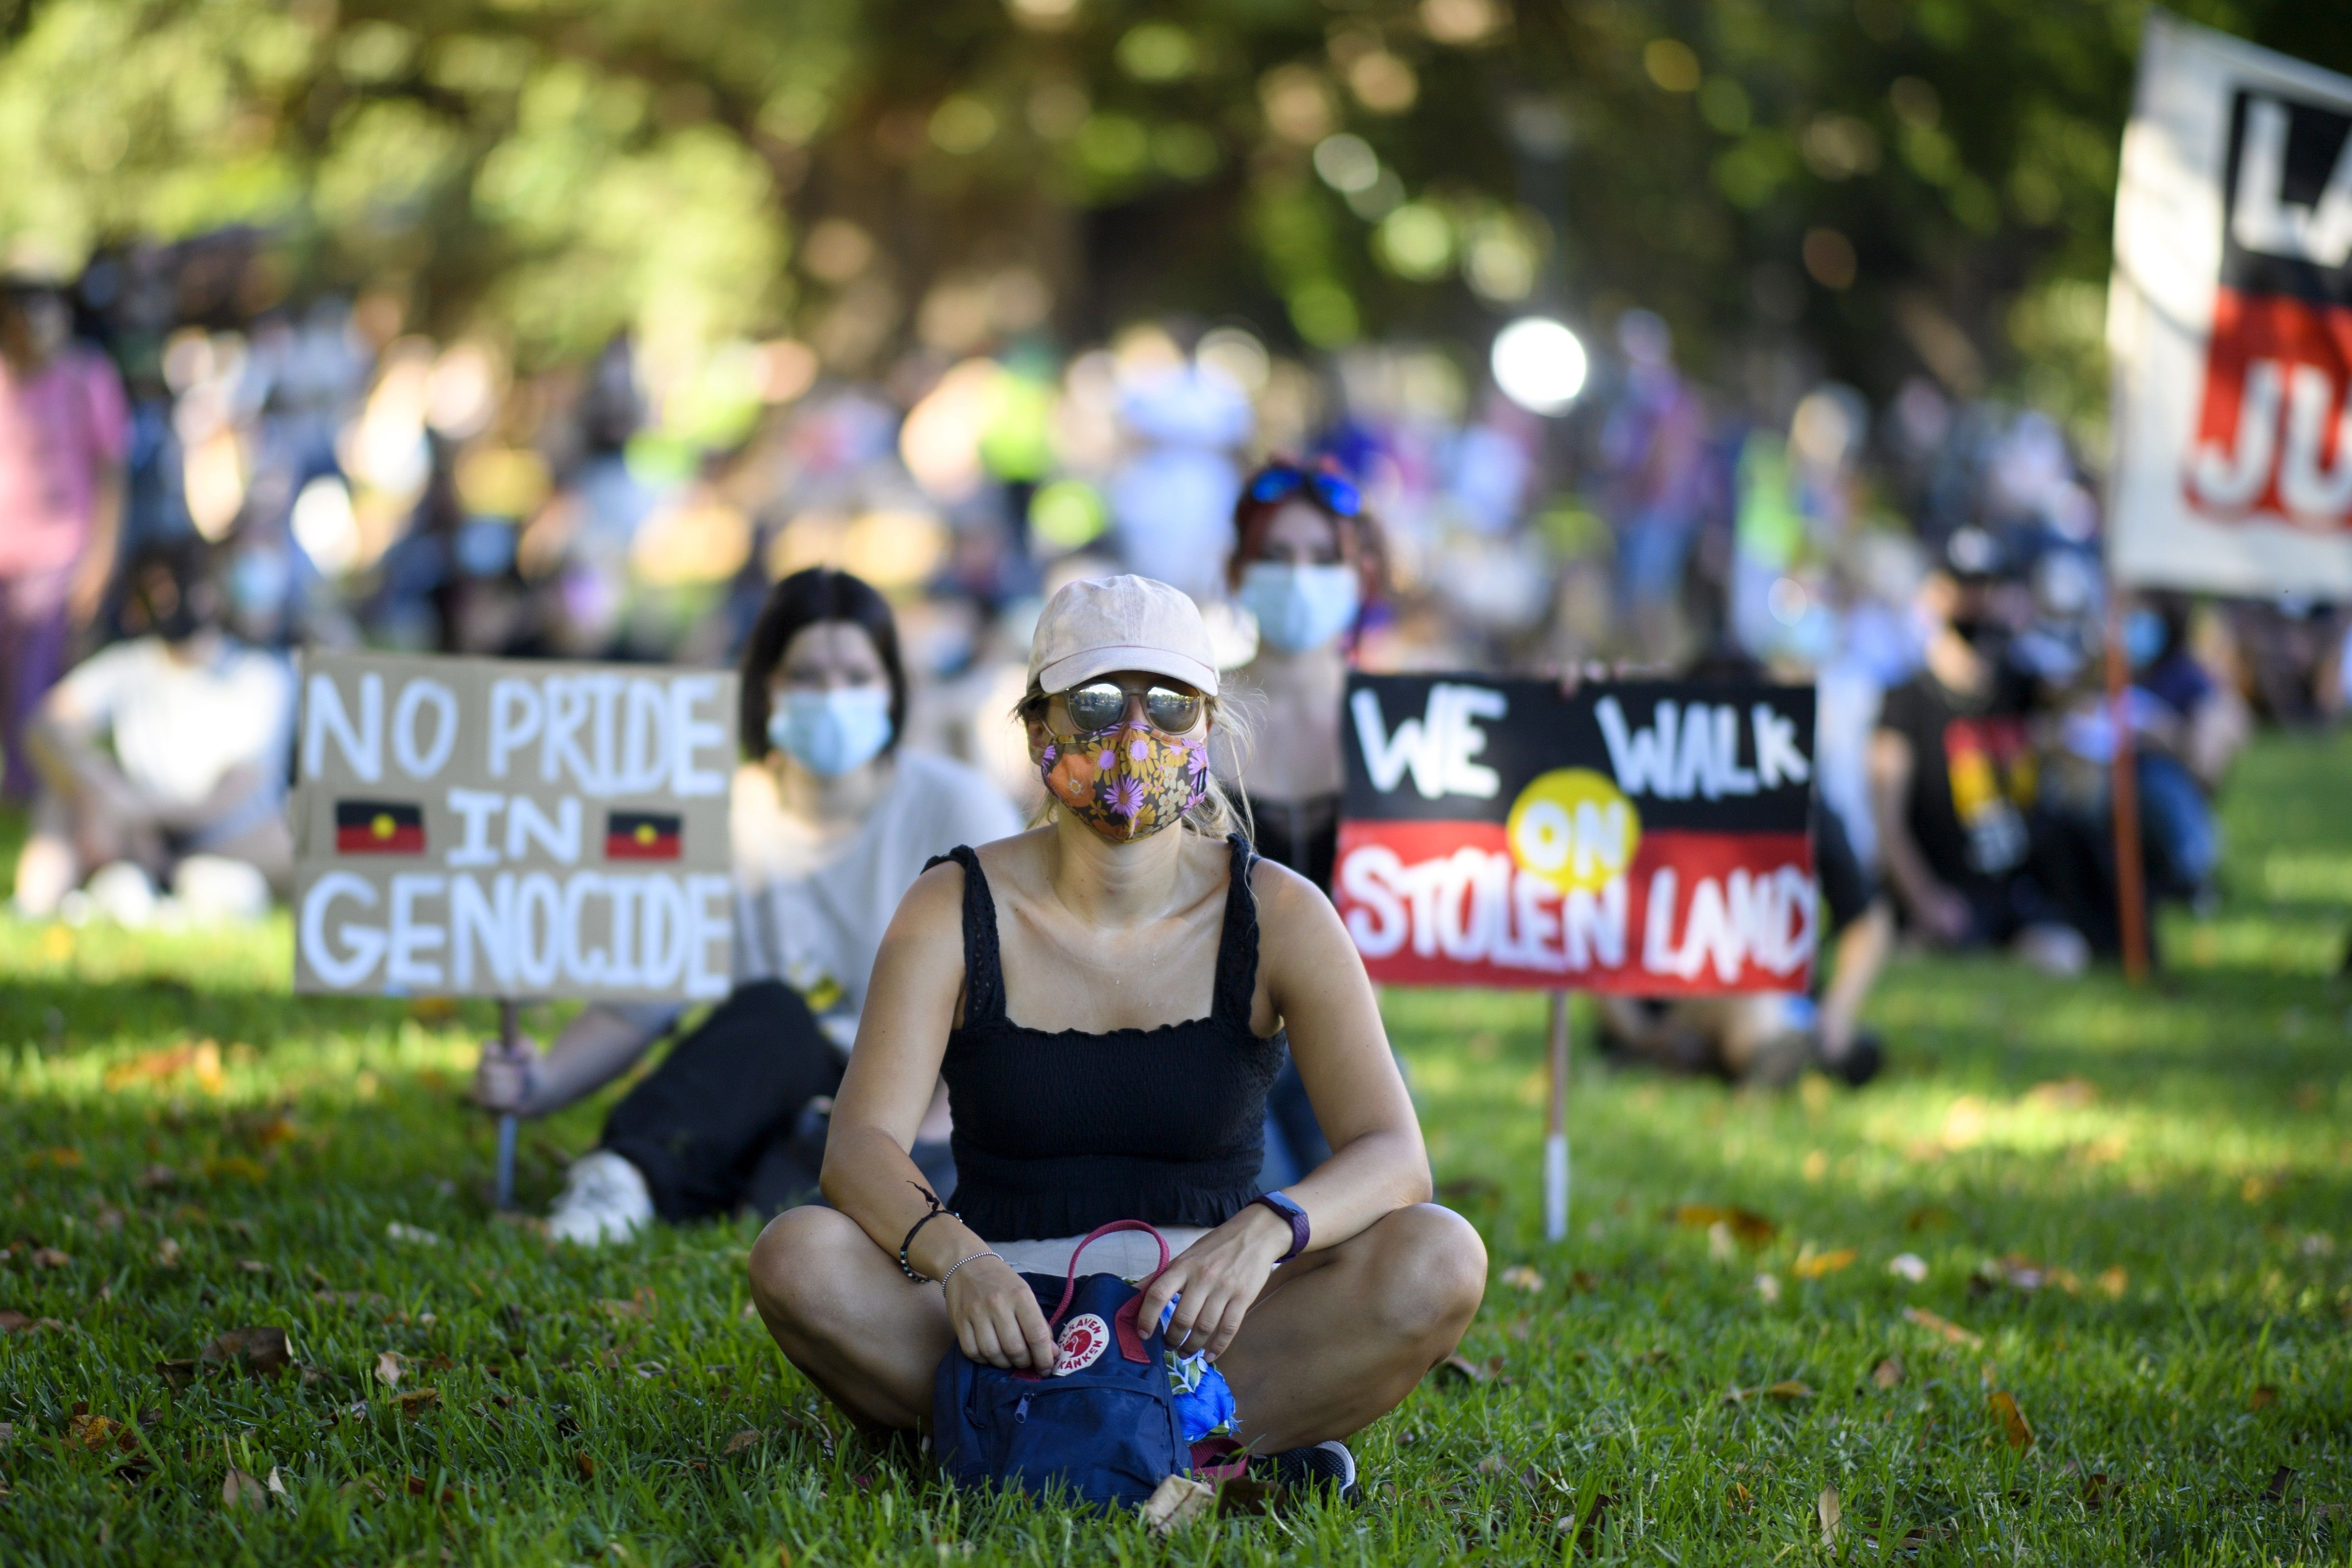 Protesters gather at The Domain during an "Invasion Day" demonstration on Australia Day in Sydney on January 26